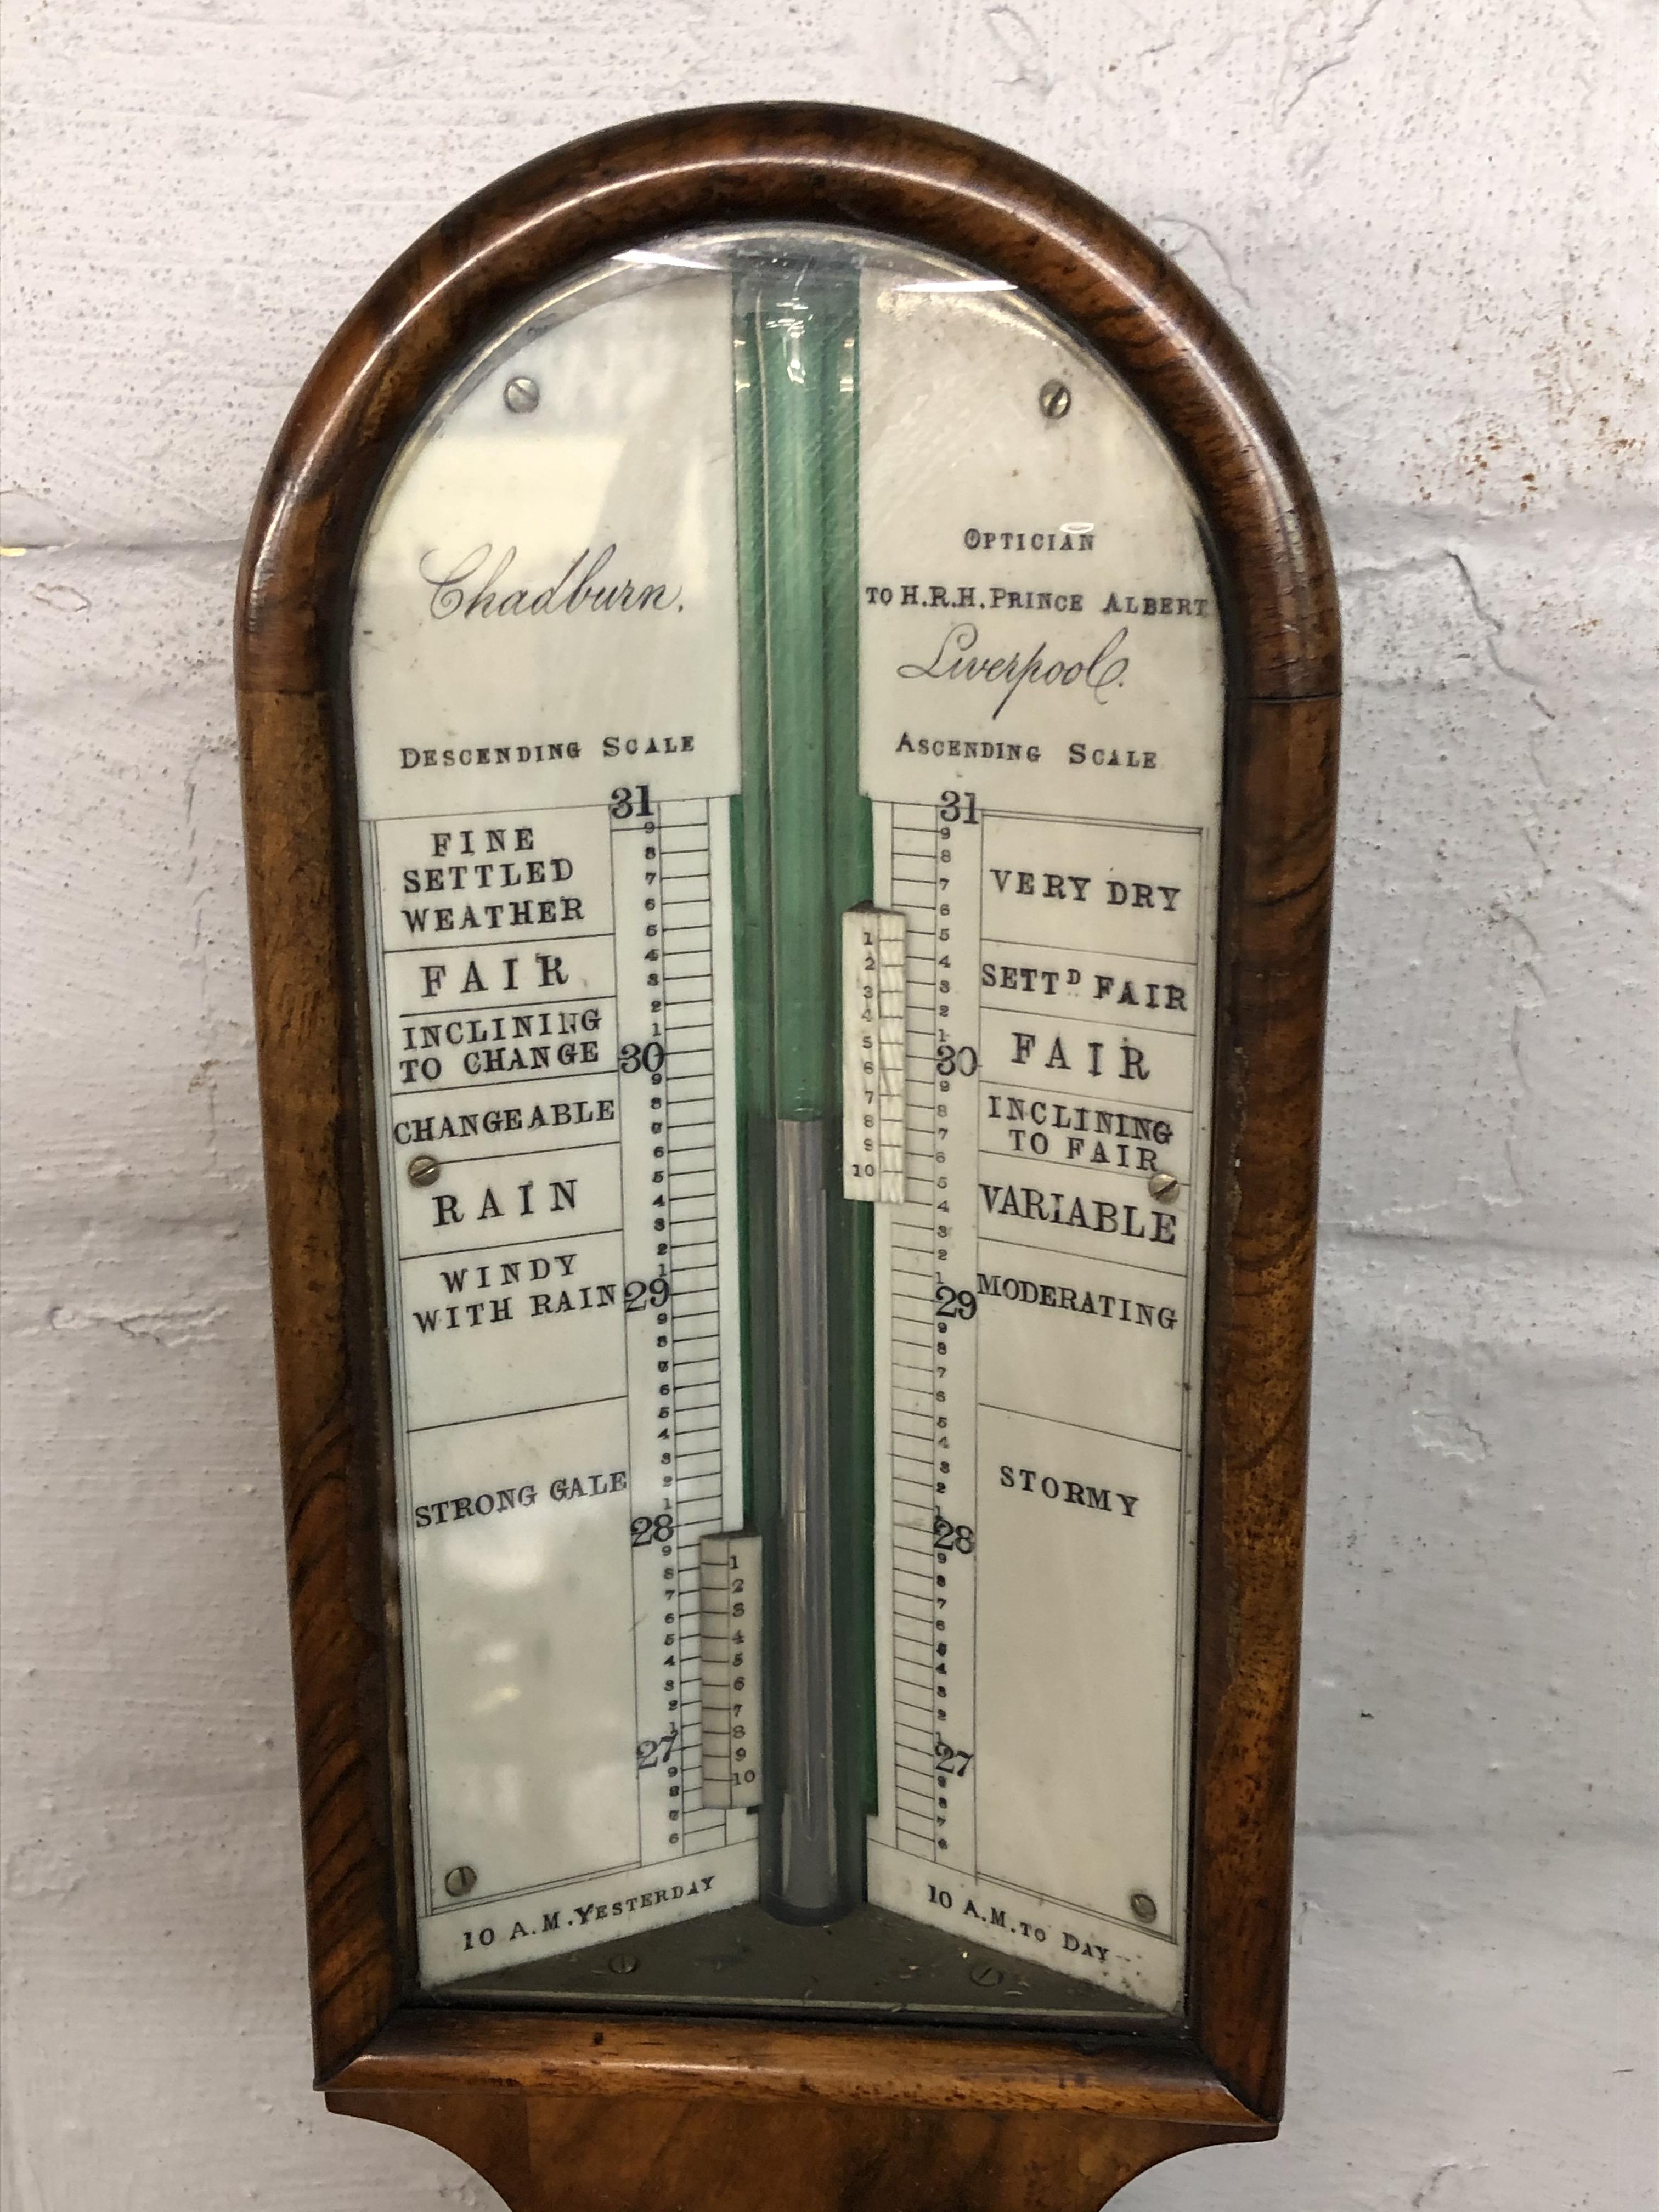 19TH CENTURY WALNUT CASED MERCURY STICK BAROMETER BY CHADBURN OPTICIAN TO HIS ROYAL HIGHNESS , - Image 2 of 5